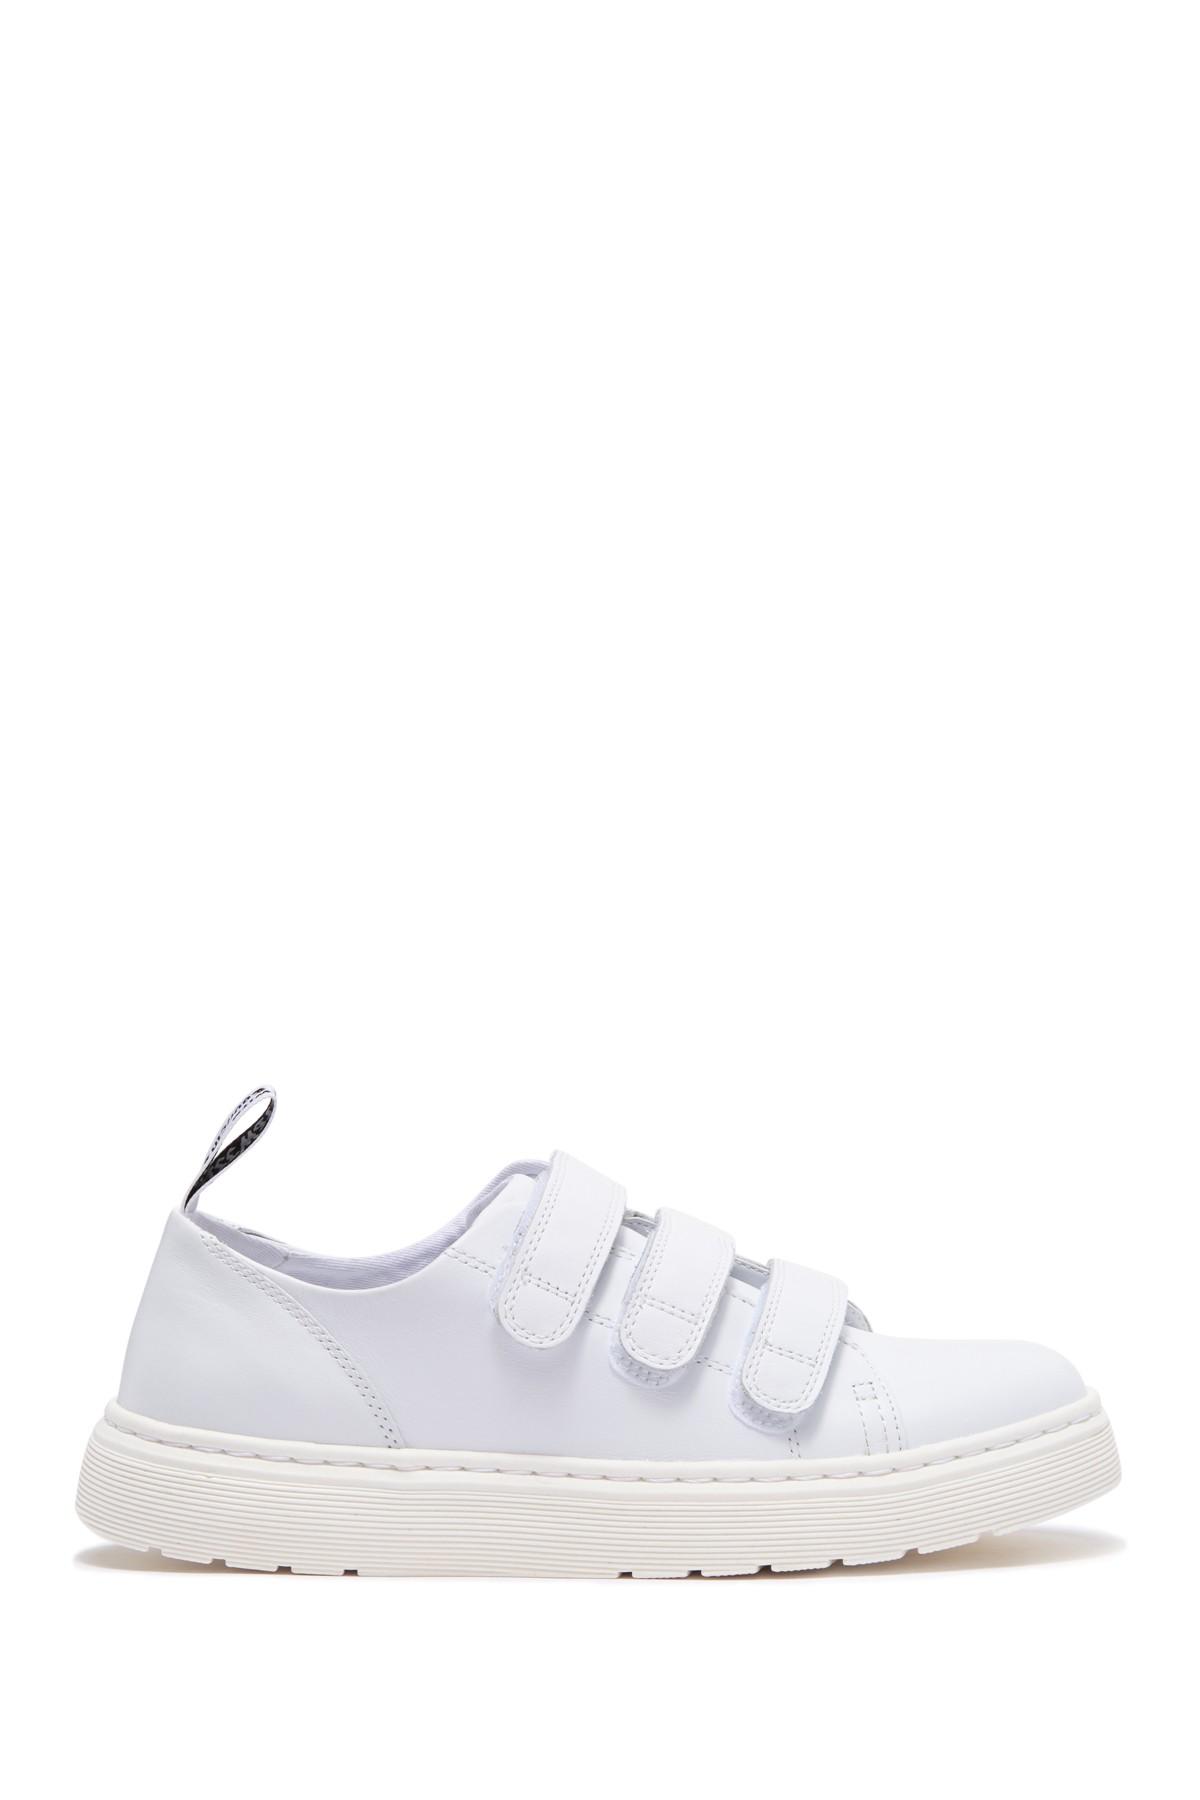 Dr. Martens Leather White Dante Strap Sneakers for Men | Lyst